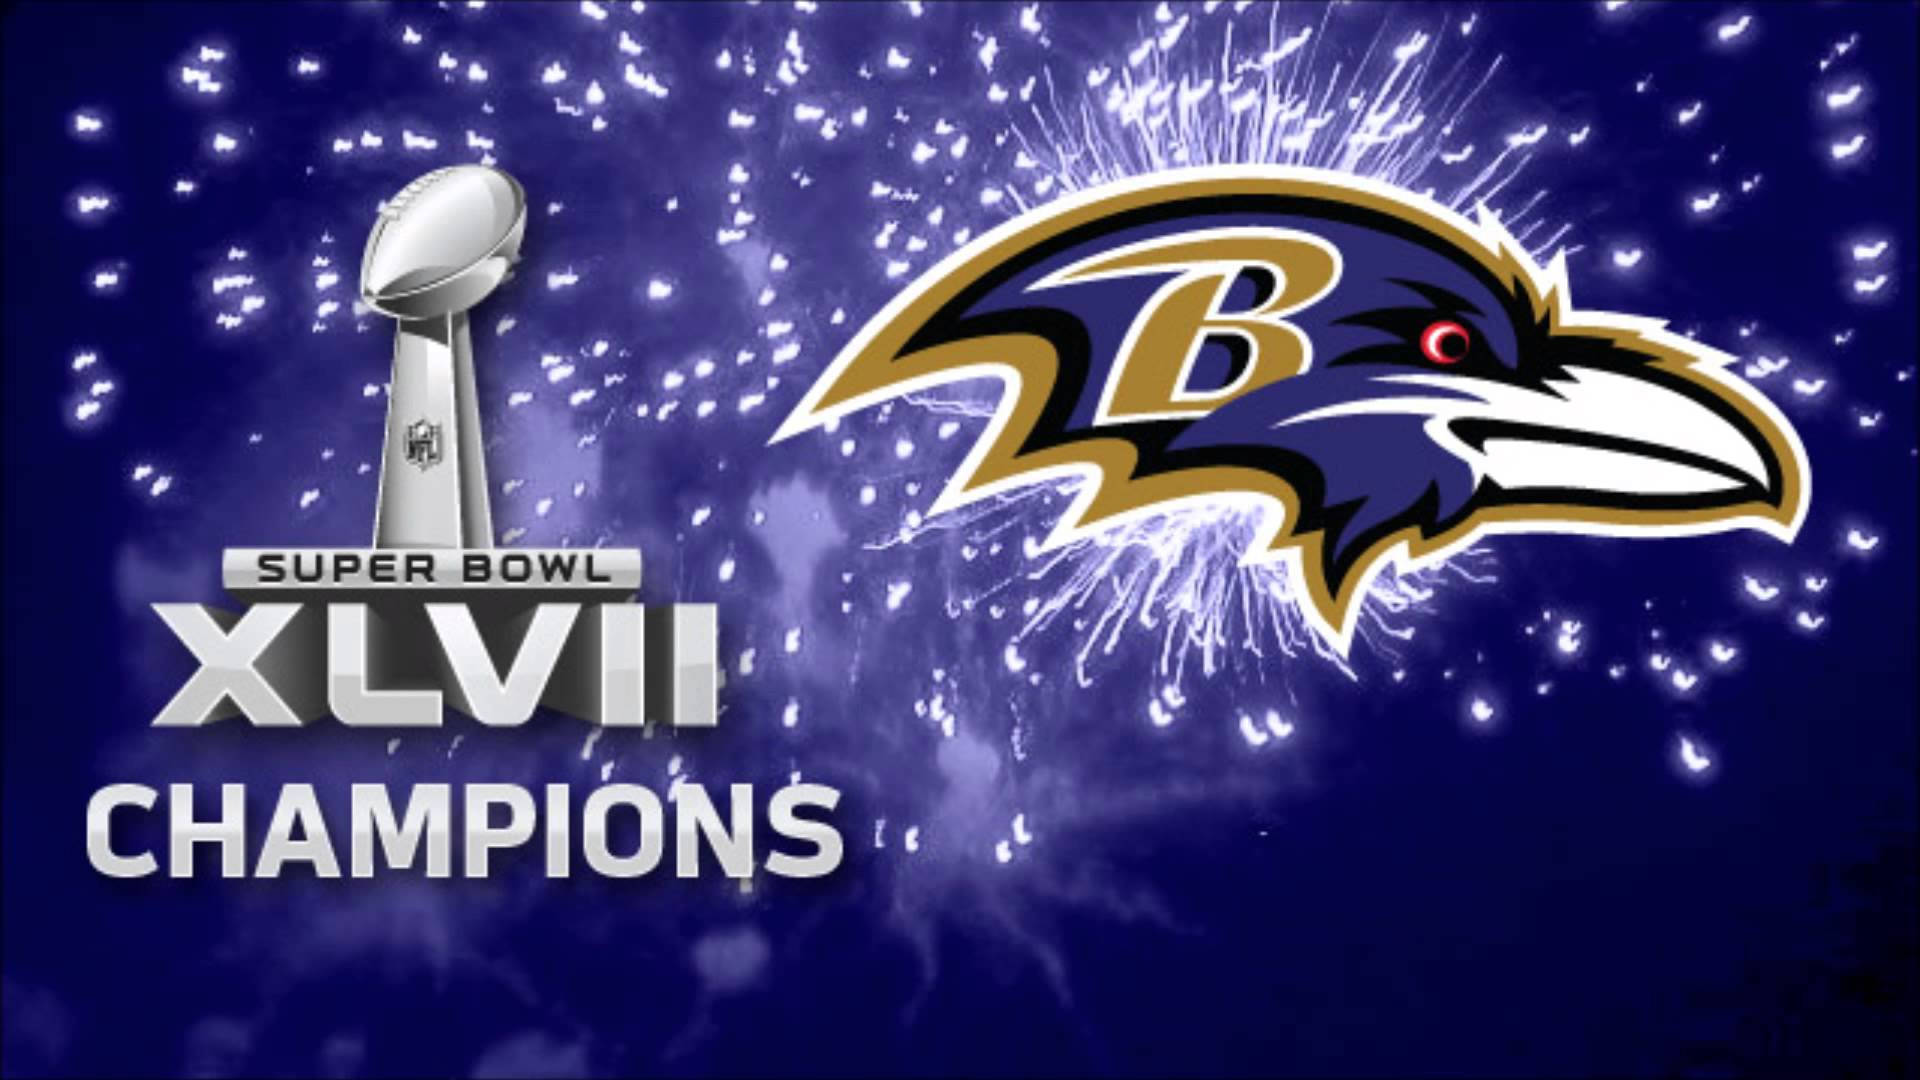 Baltimore Ravens 1920X1080 Wallpaper and Background Image